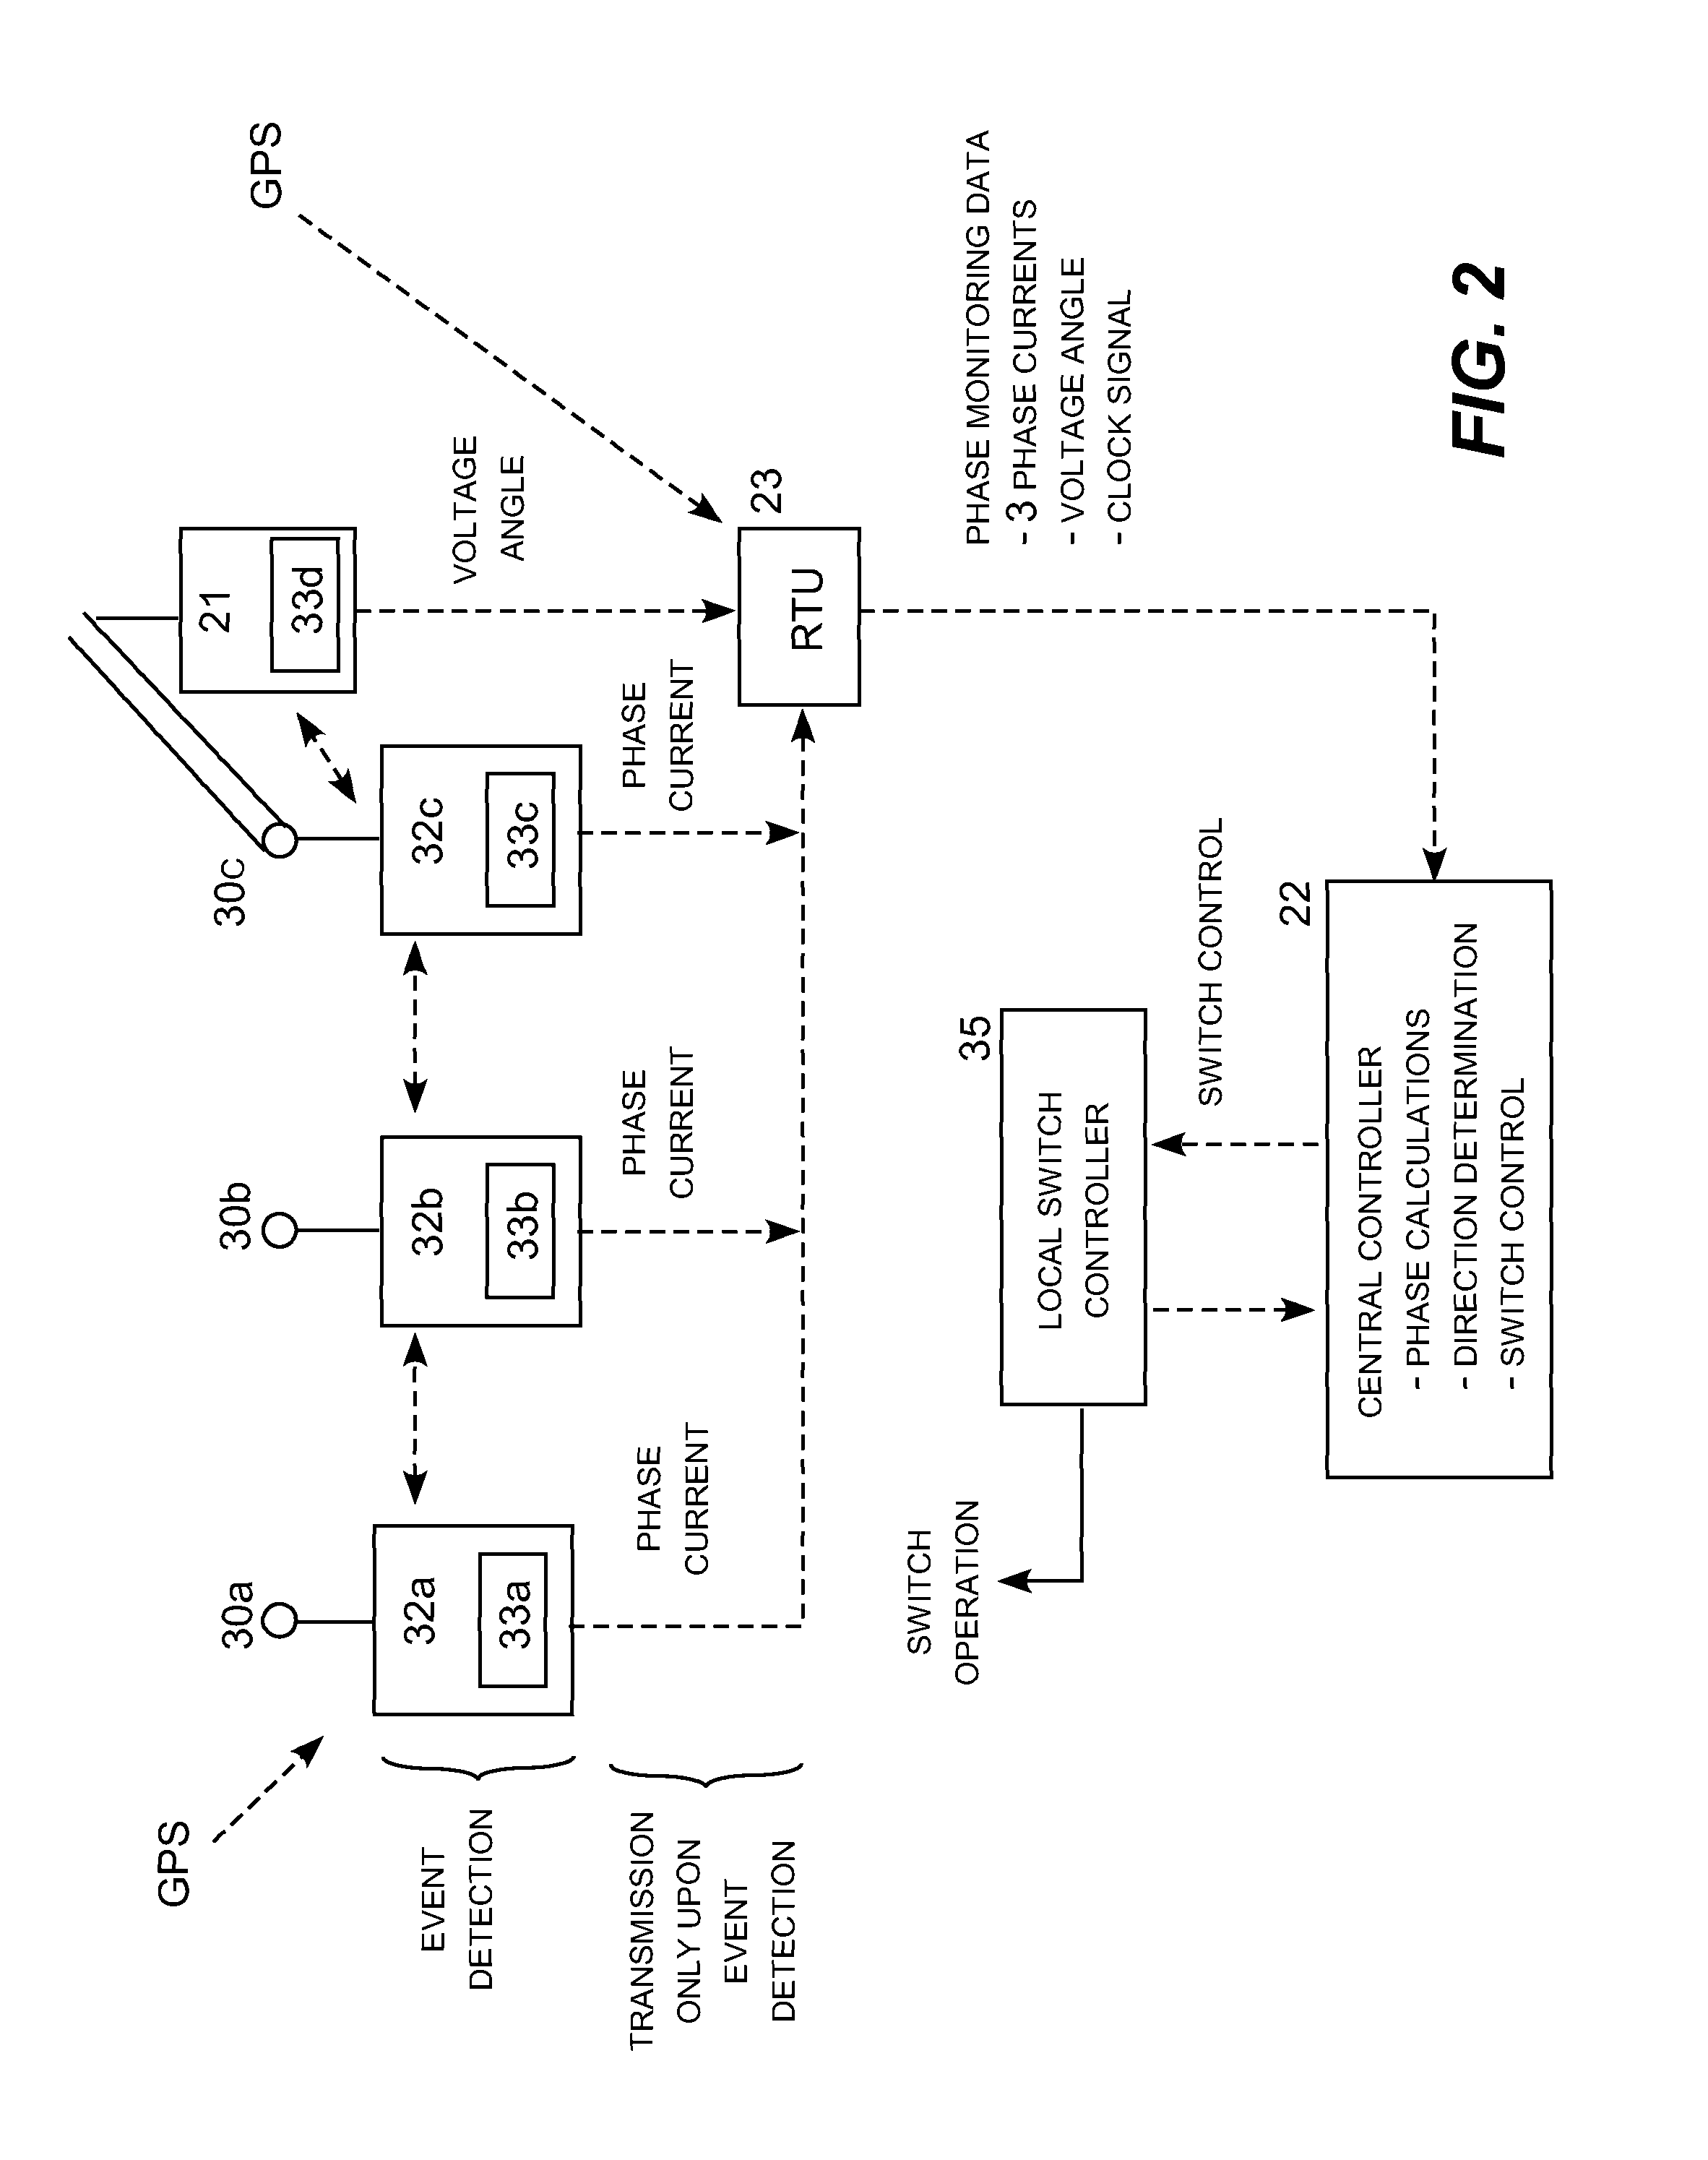 High-impedance fault detection and isolation system